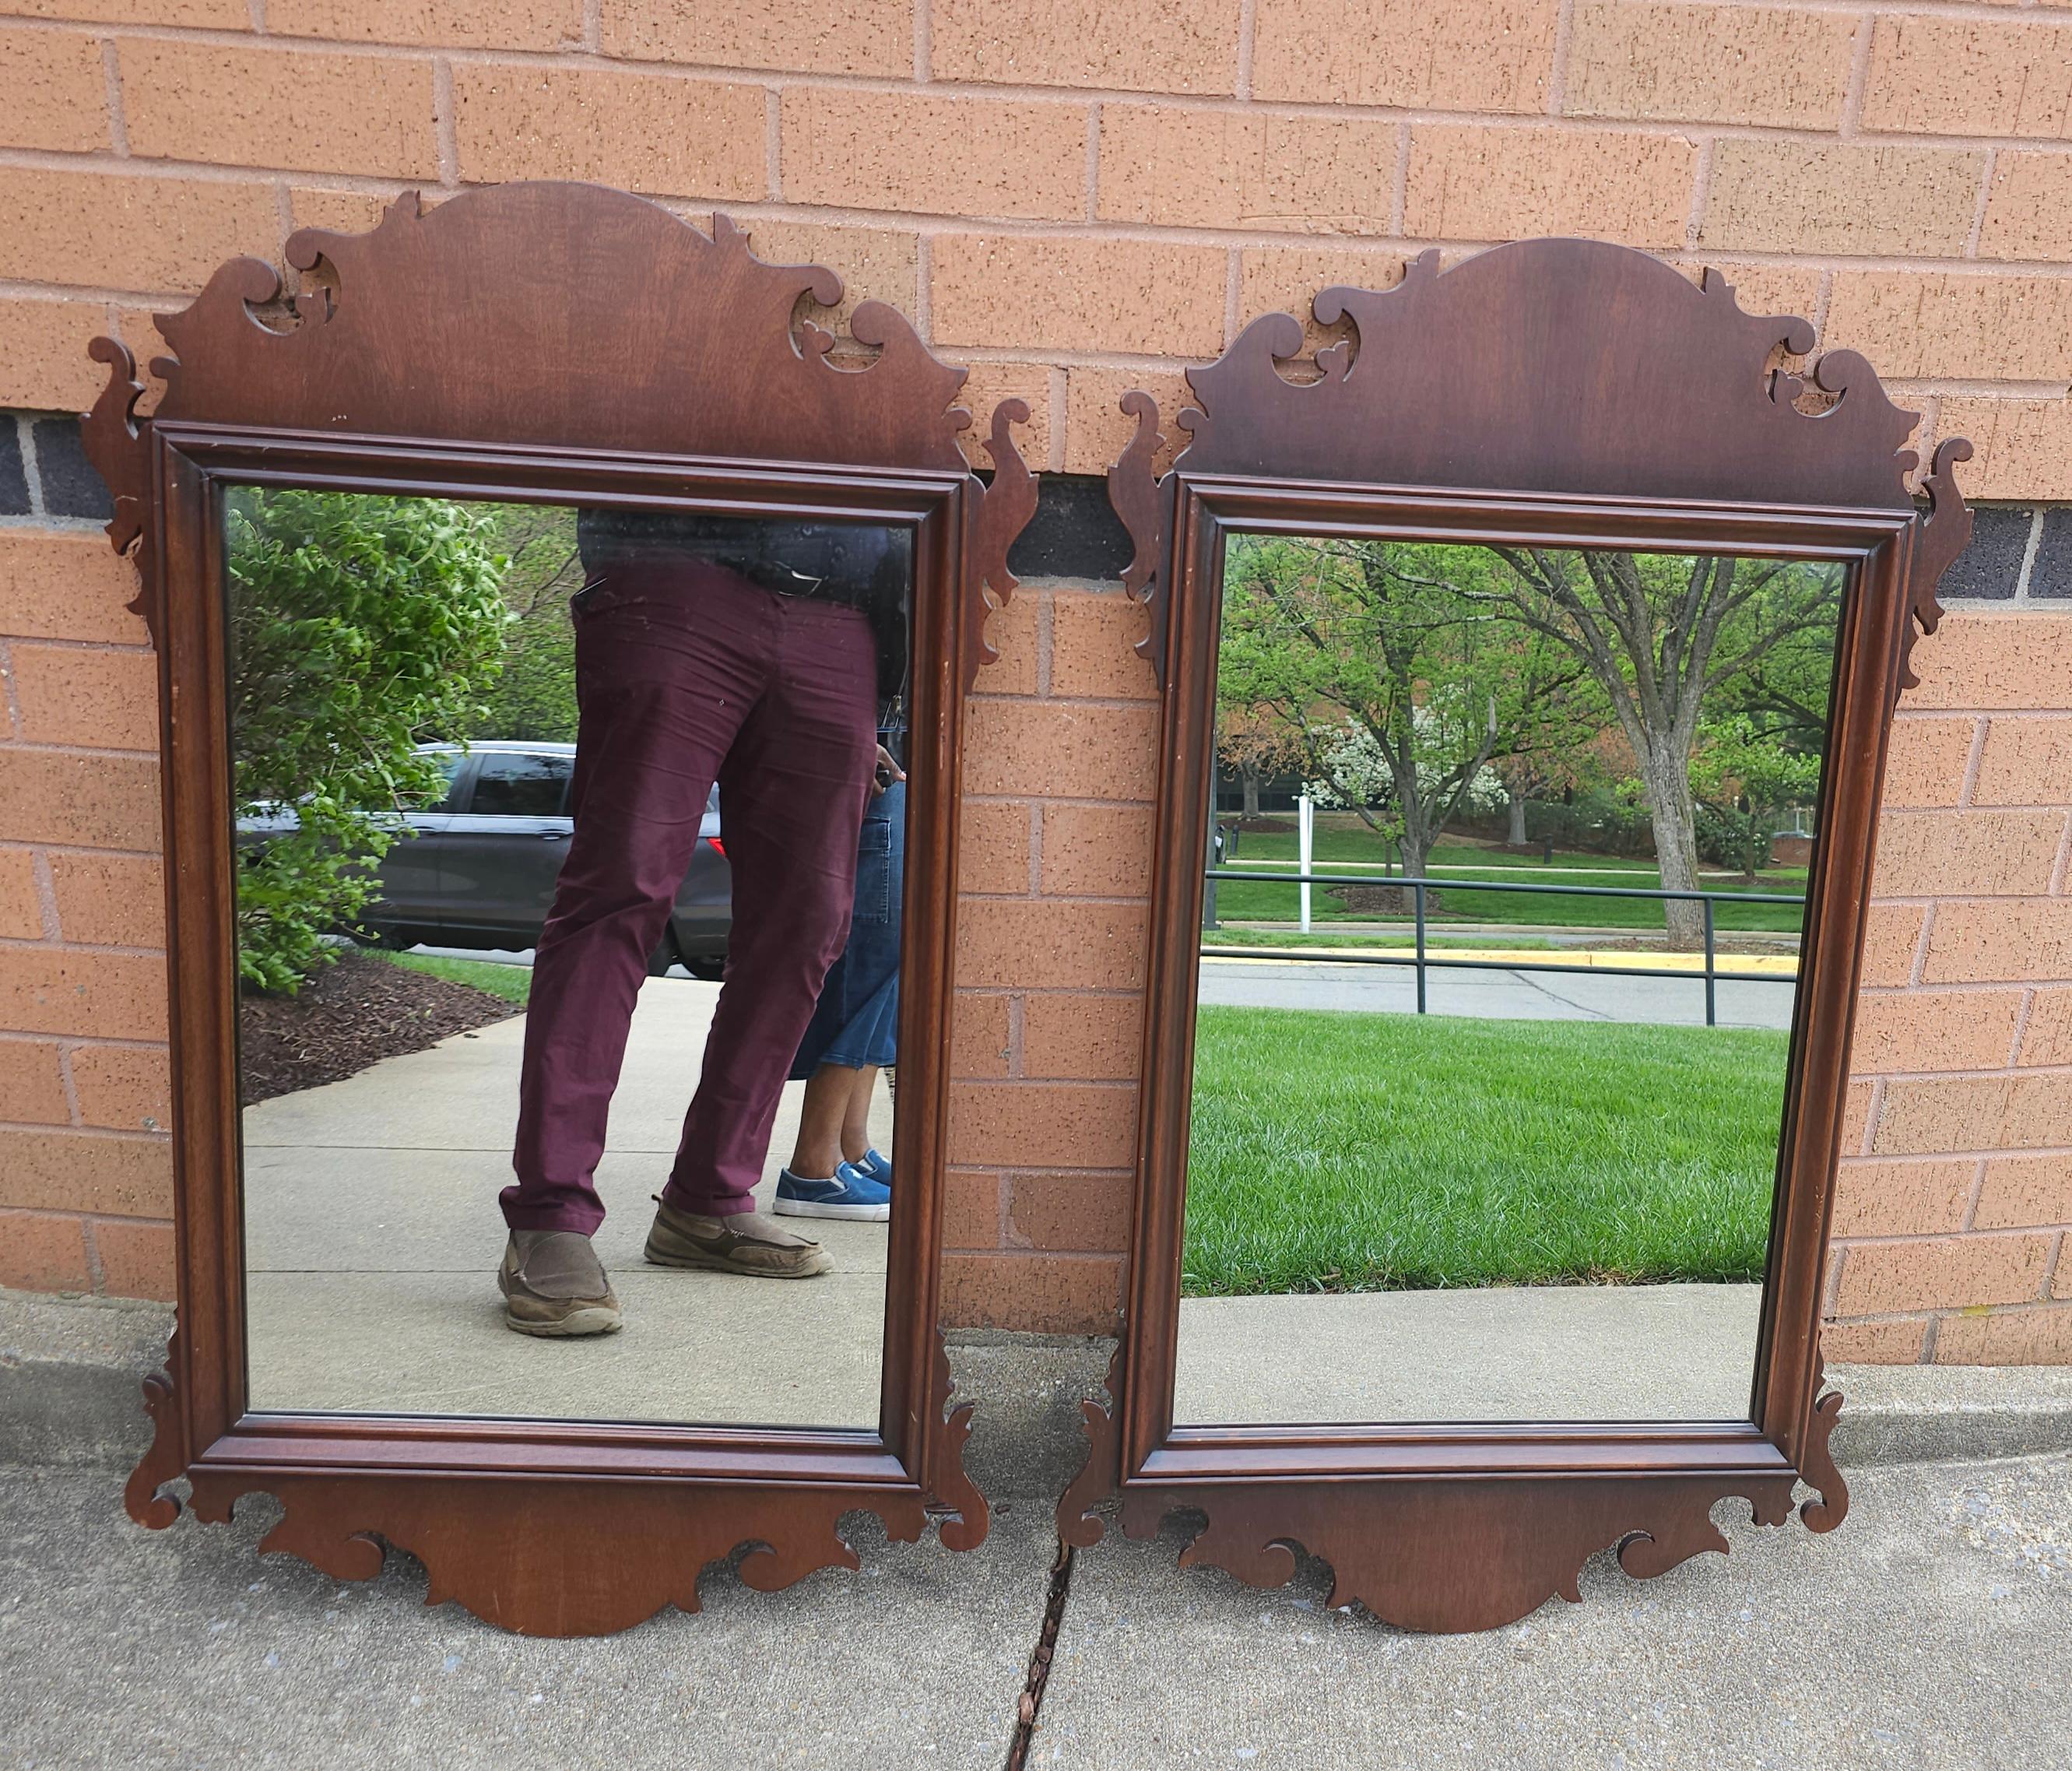 Pair Mid 20th Century Kindel Furniture Chippendale Style Oxford Mahogany Mirrors in great vintage condition.
Measures 24